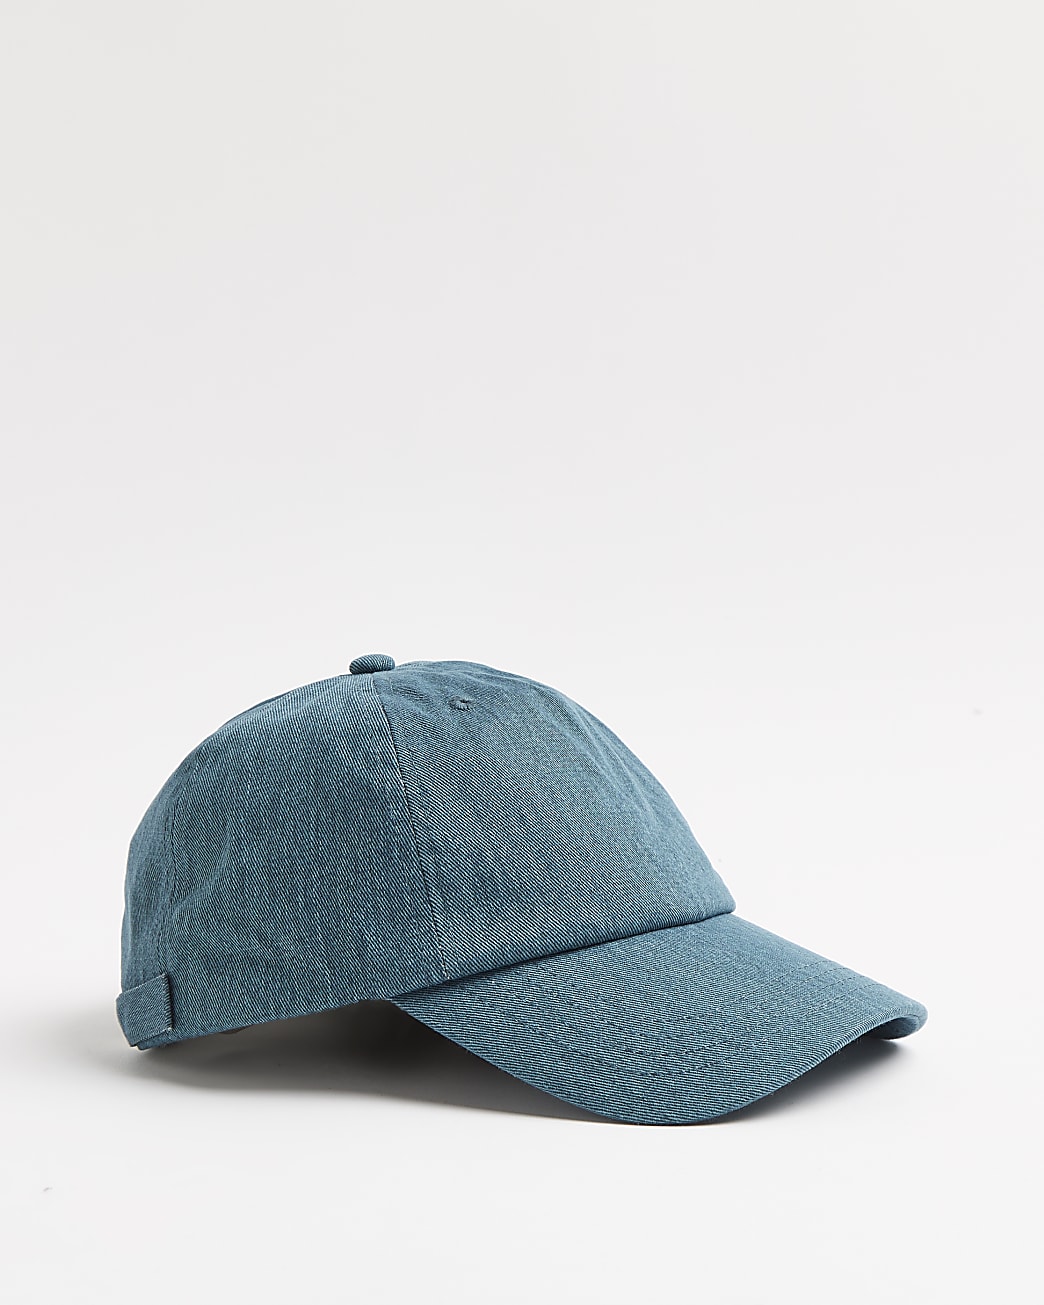 Green washed RI embroidered twill cap